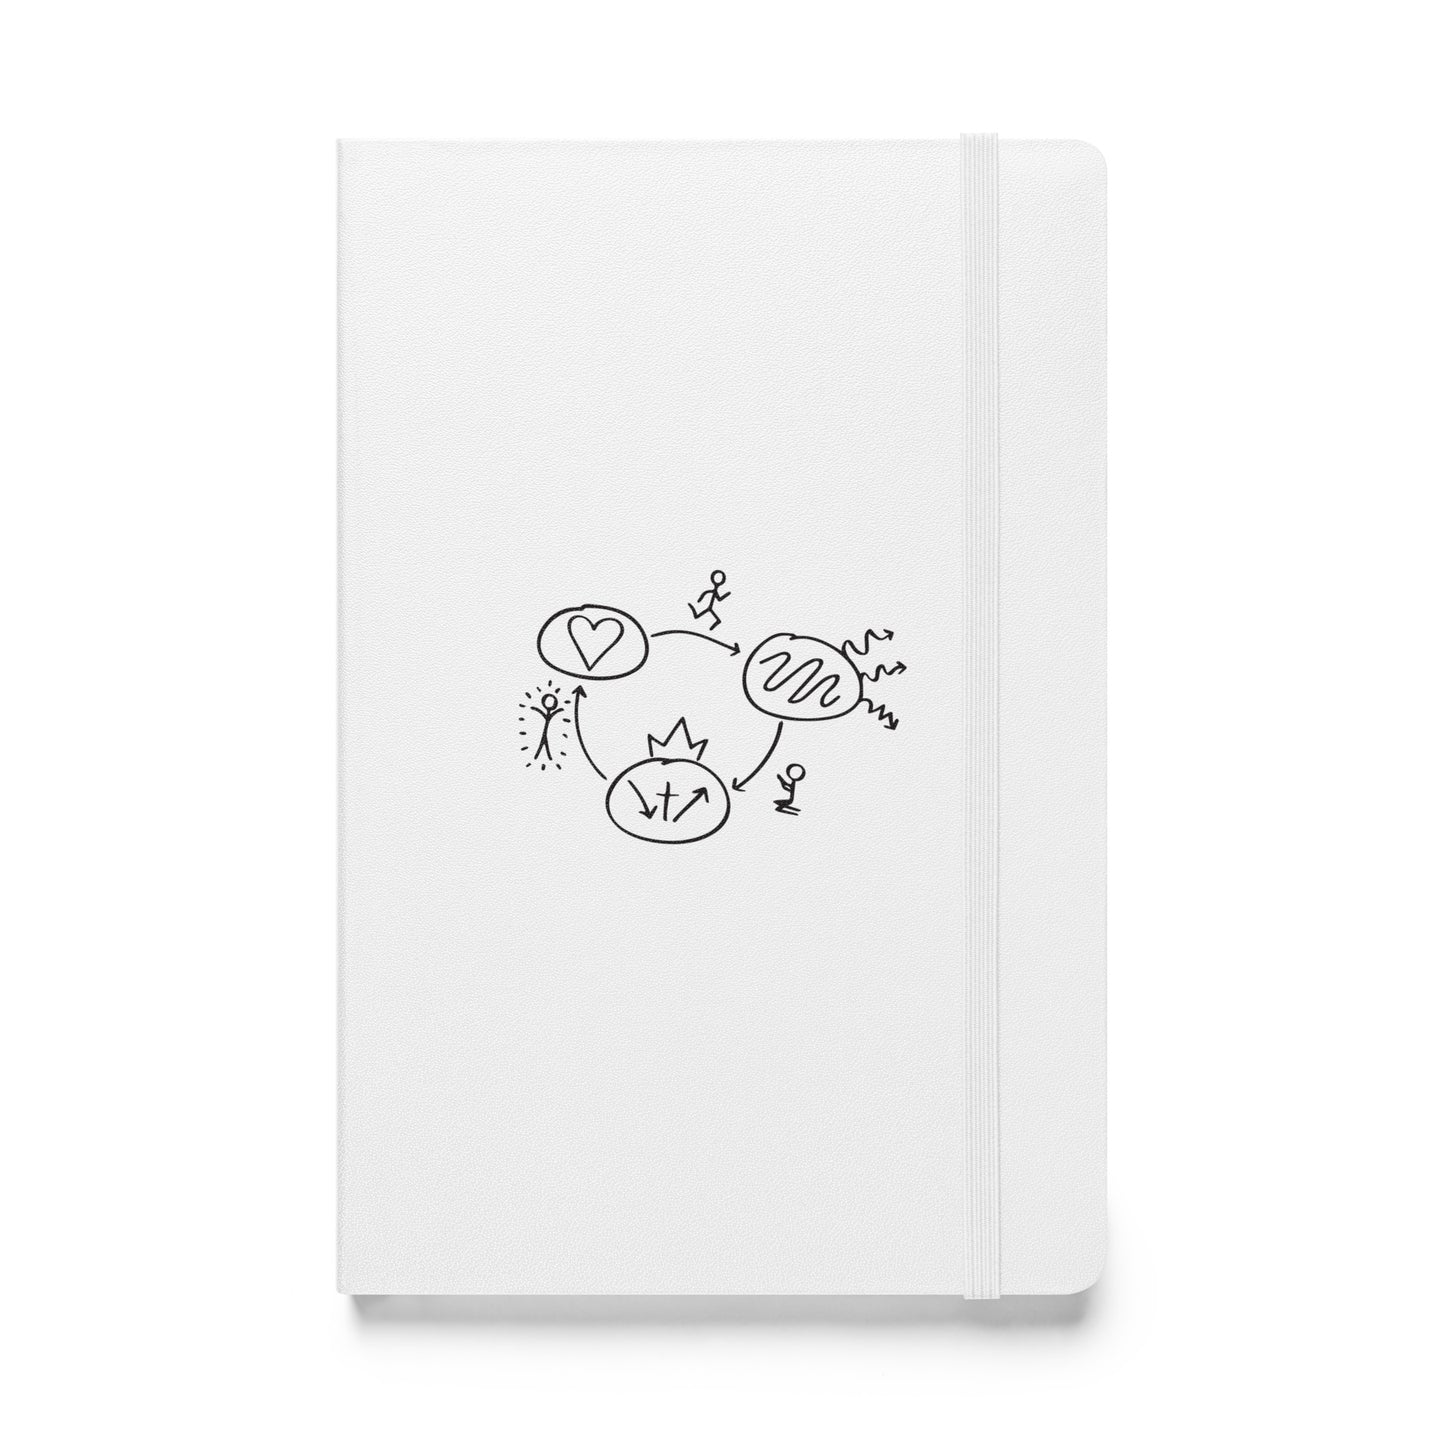 3-Circles - Hardcover bound notebook